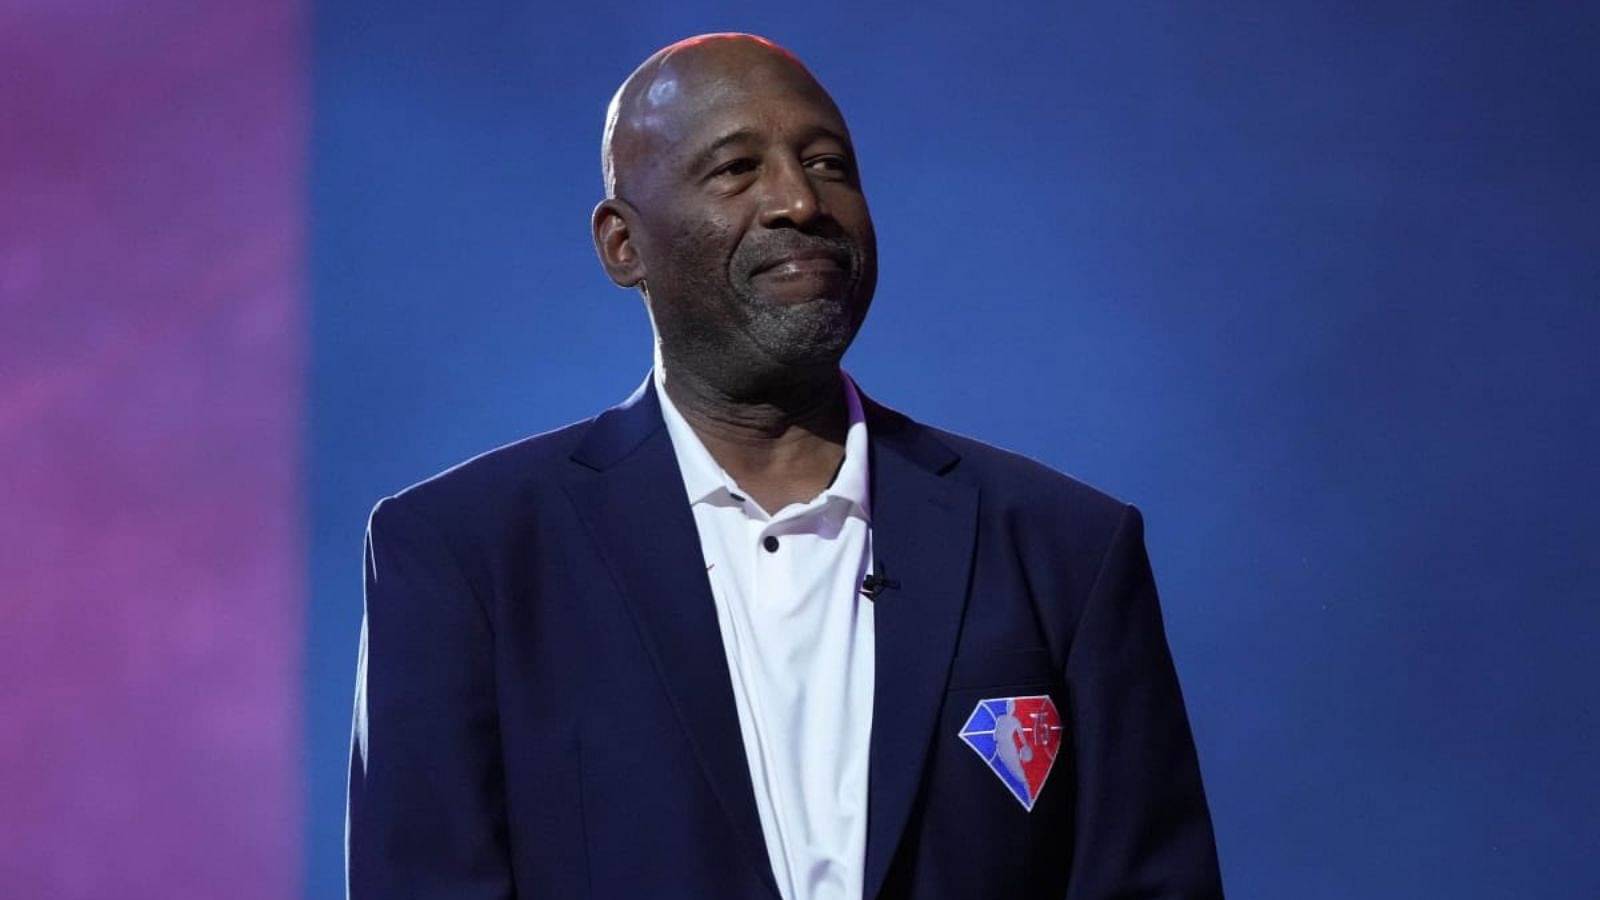 James Worthy revealed LA’s $1.1 million worth ‘Superman’ used beat the heck out of him